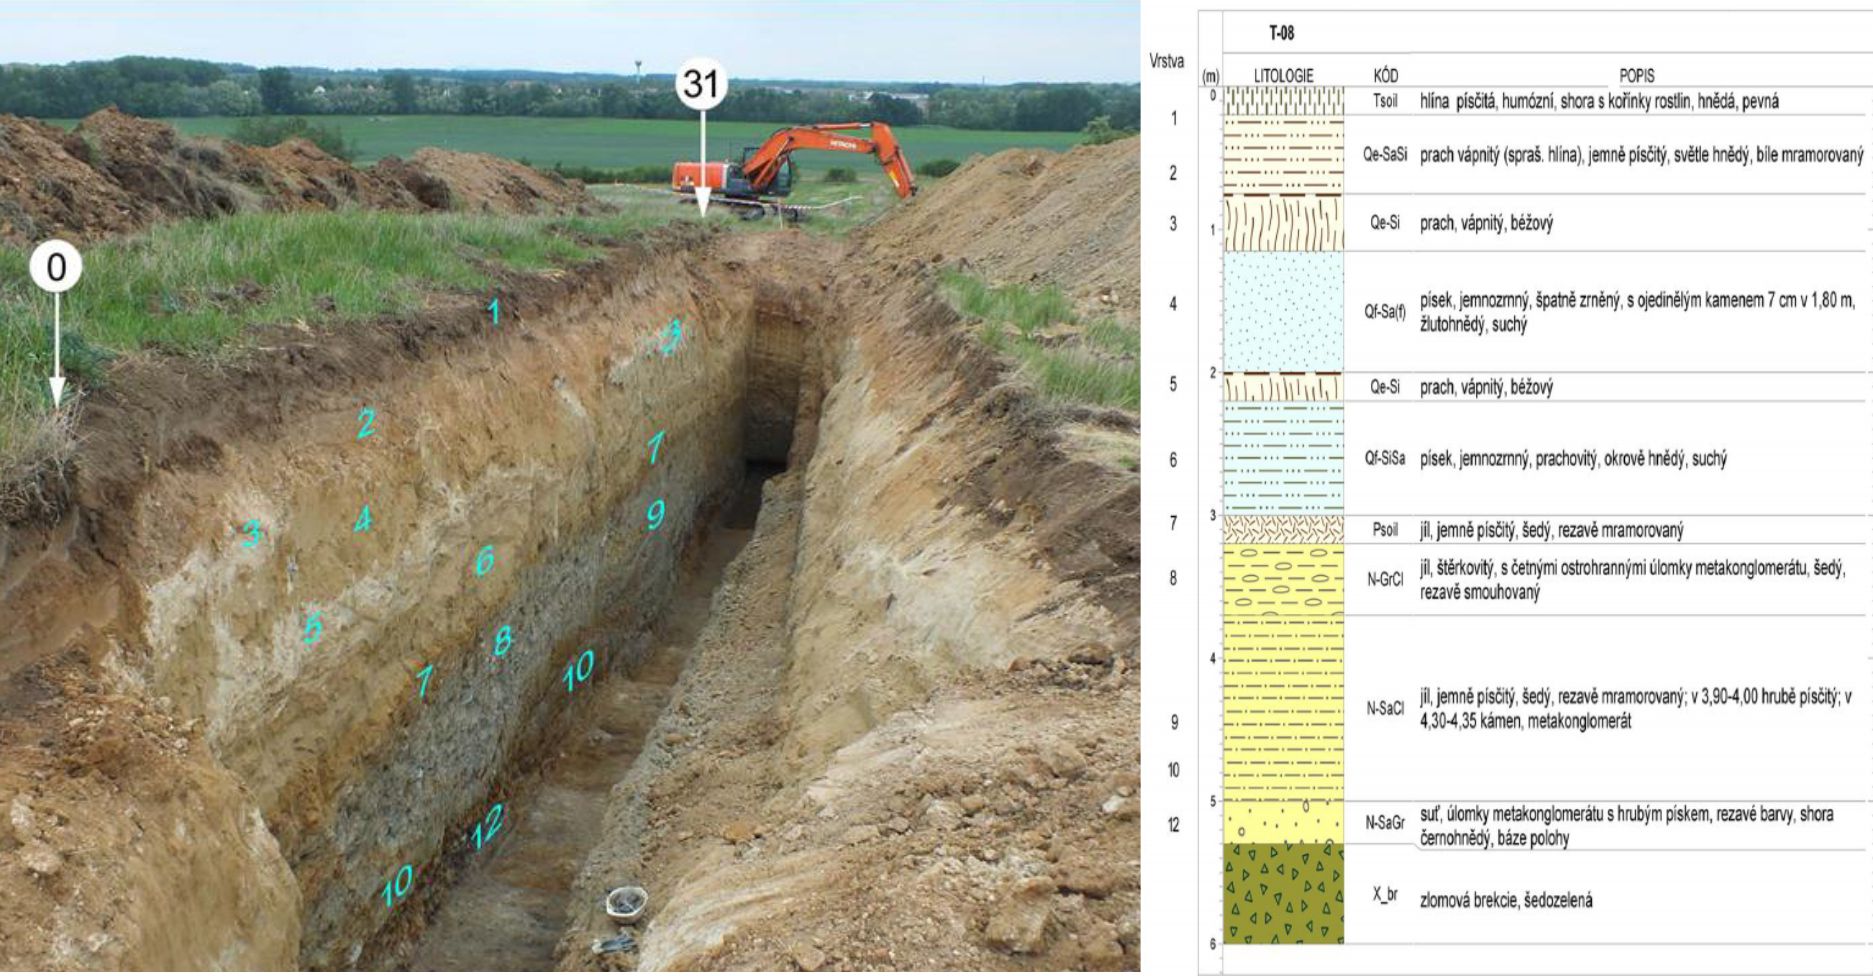 Trench RTAS-3 and stratigraphic scheme of exposed sequence of sediments.